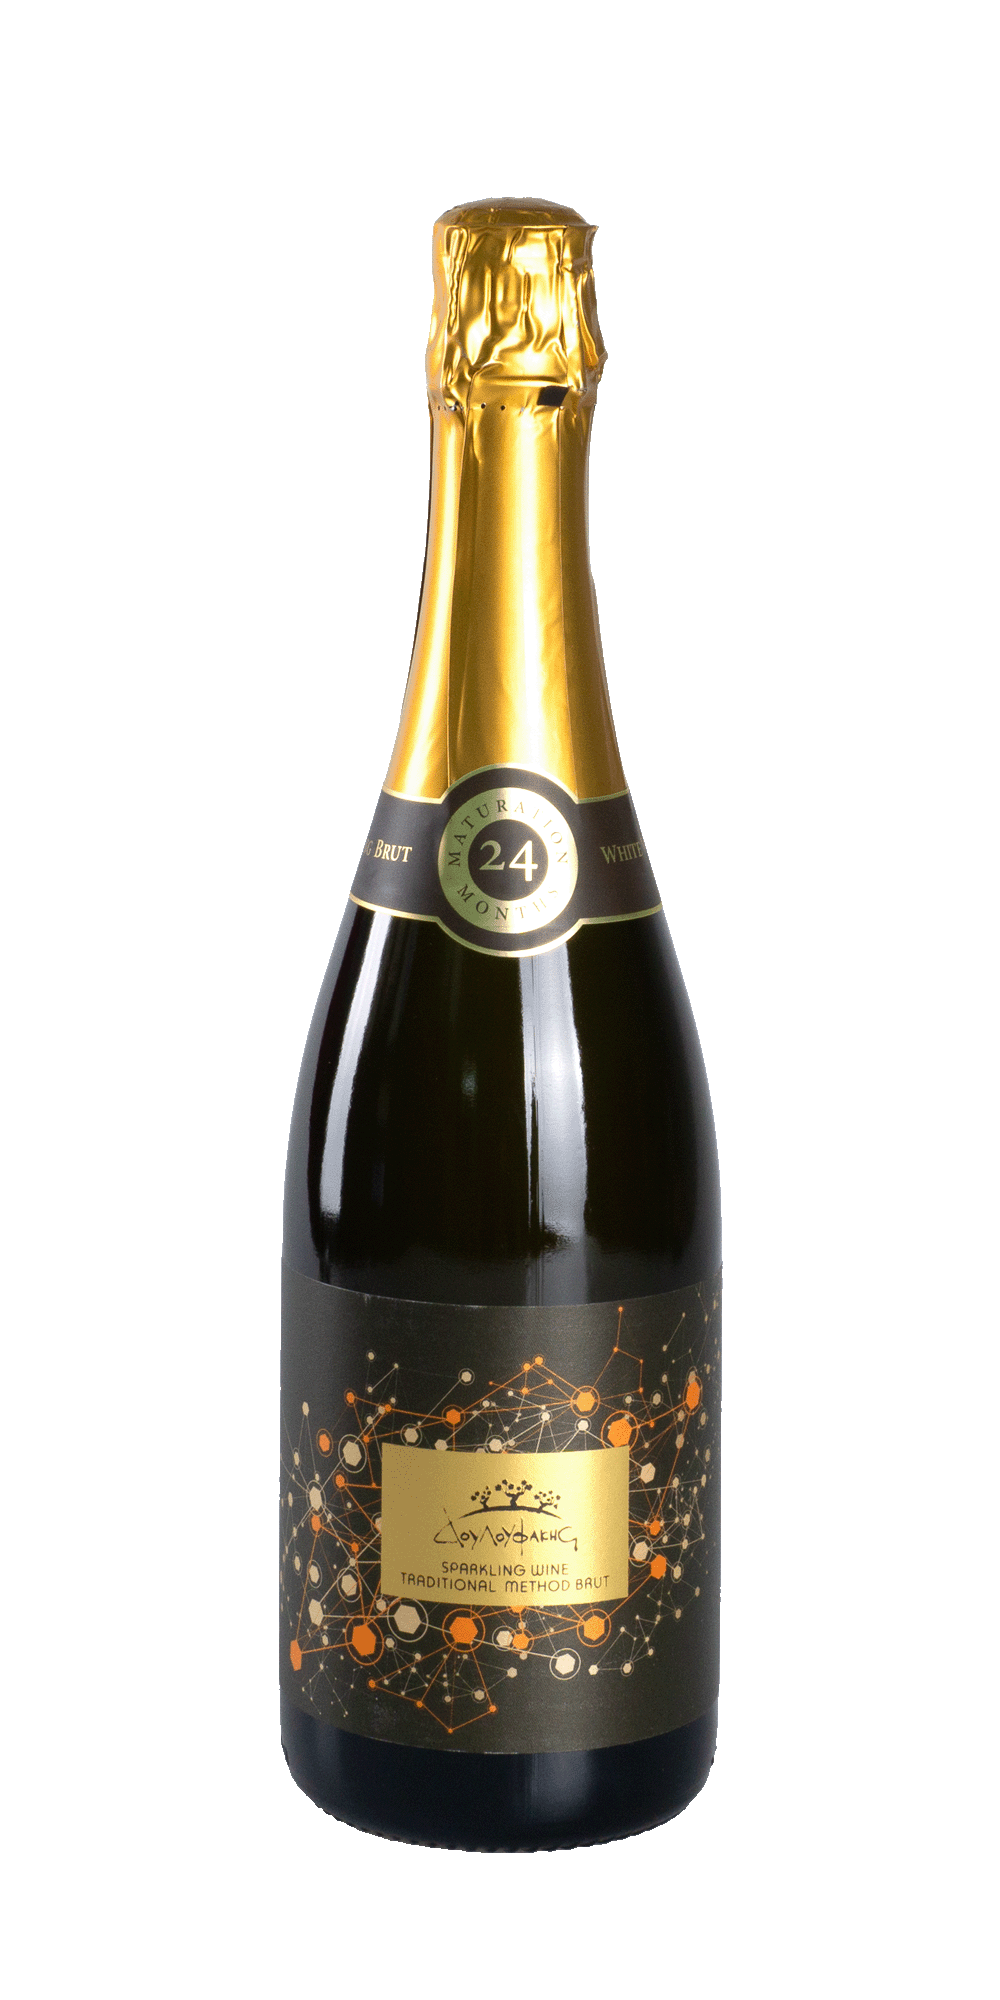 Vidiano Sparkling Brut - Douloufakis Winery